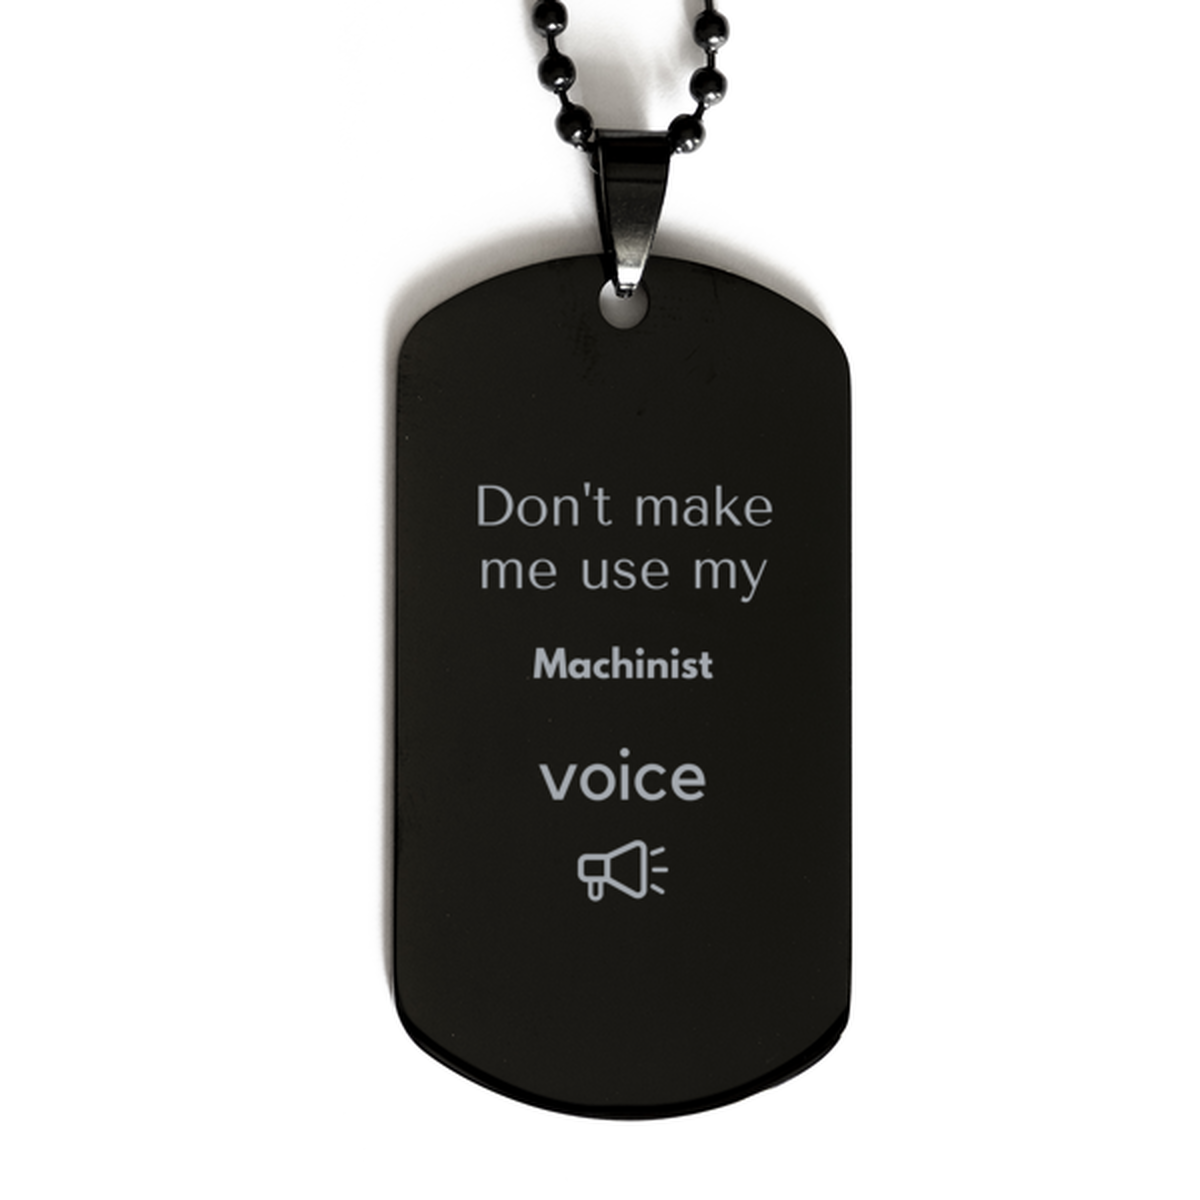 Don't make me use my Machinist voice, Sarcasm Machinist Gifts, Christmas Machinist Black Dog Tag Birthday Unique Gifts For Machinist Coworkers, Men, Women, Colleague, Friends